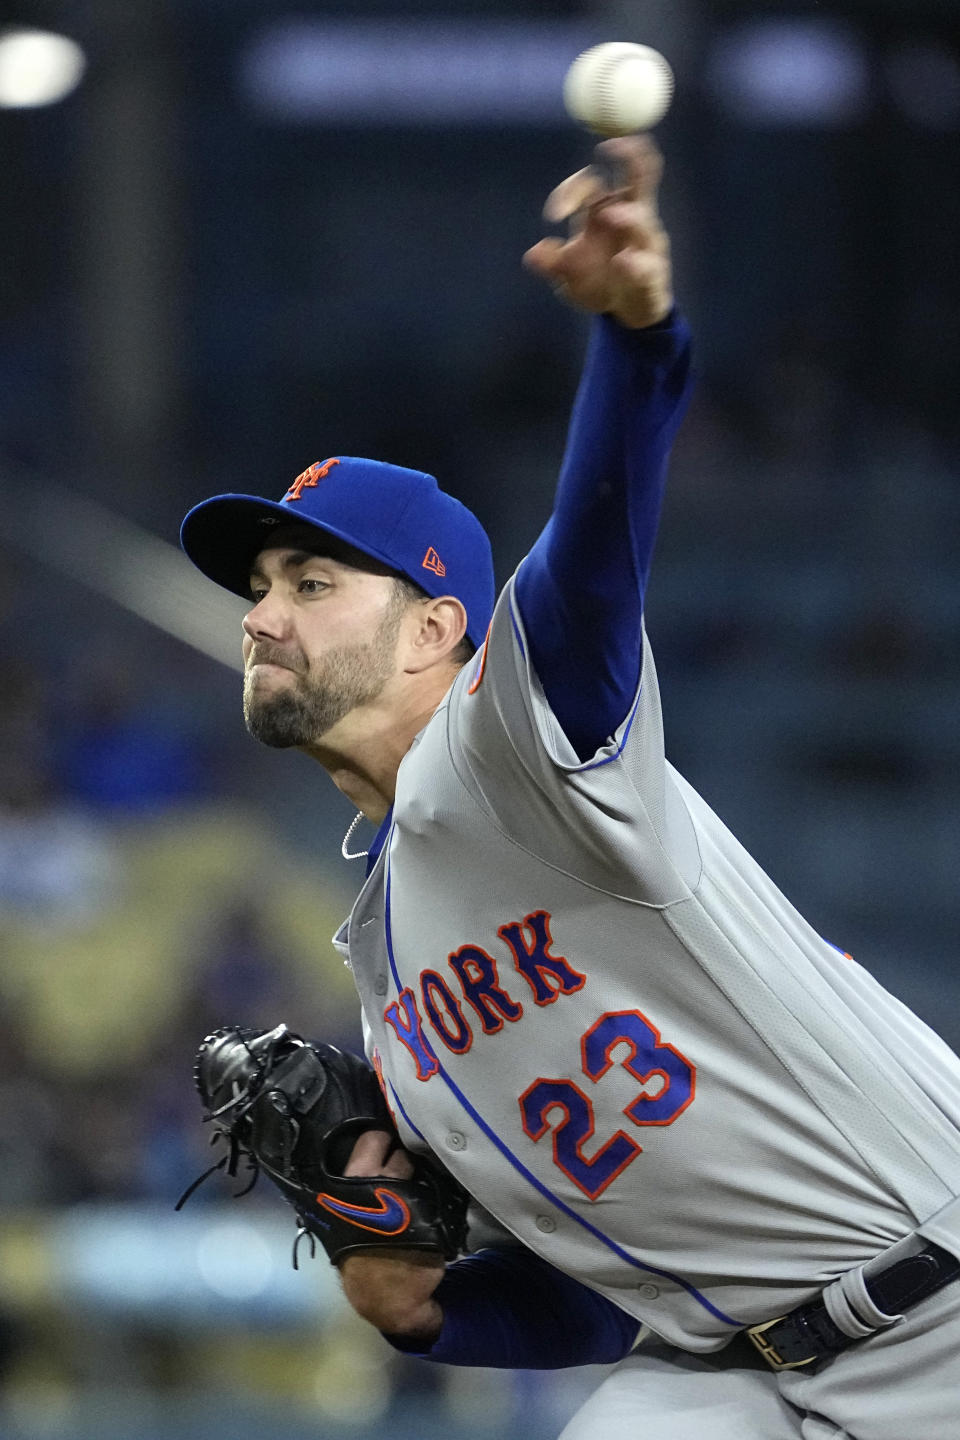 New York Mets starting pitcher David Peterson throws to the plate during the first inning of a baseball game against the Los Angeles Dodgers Monday, April 17, 2023, in Los Angeles. (AP Photo/Mark J. Terrill)